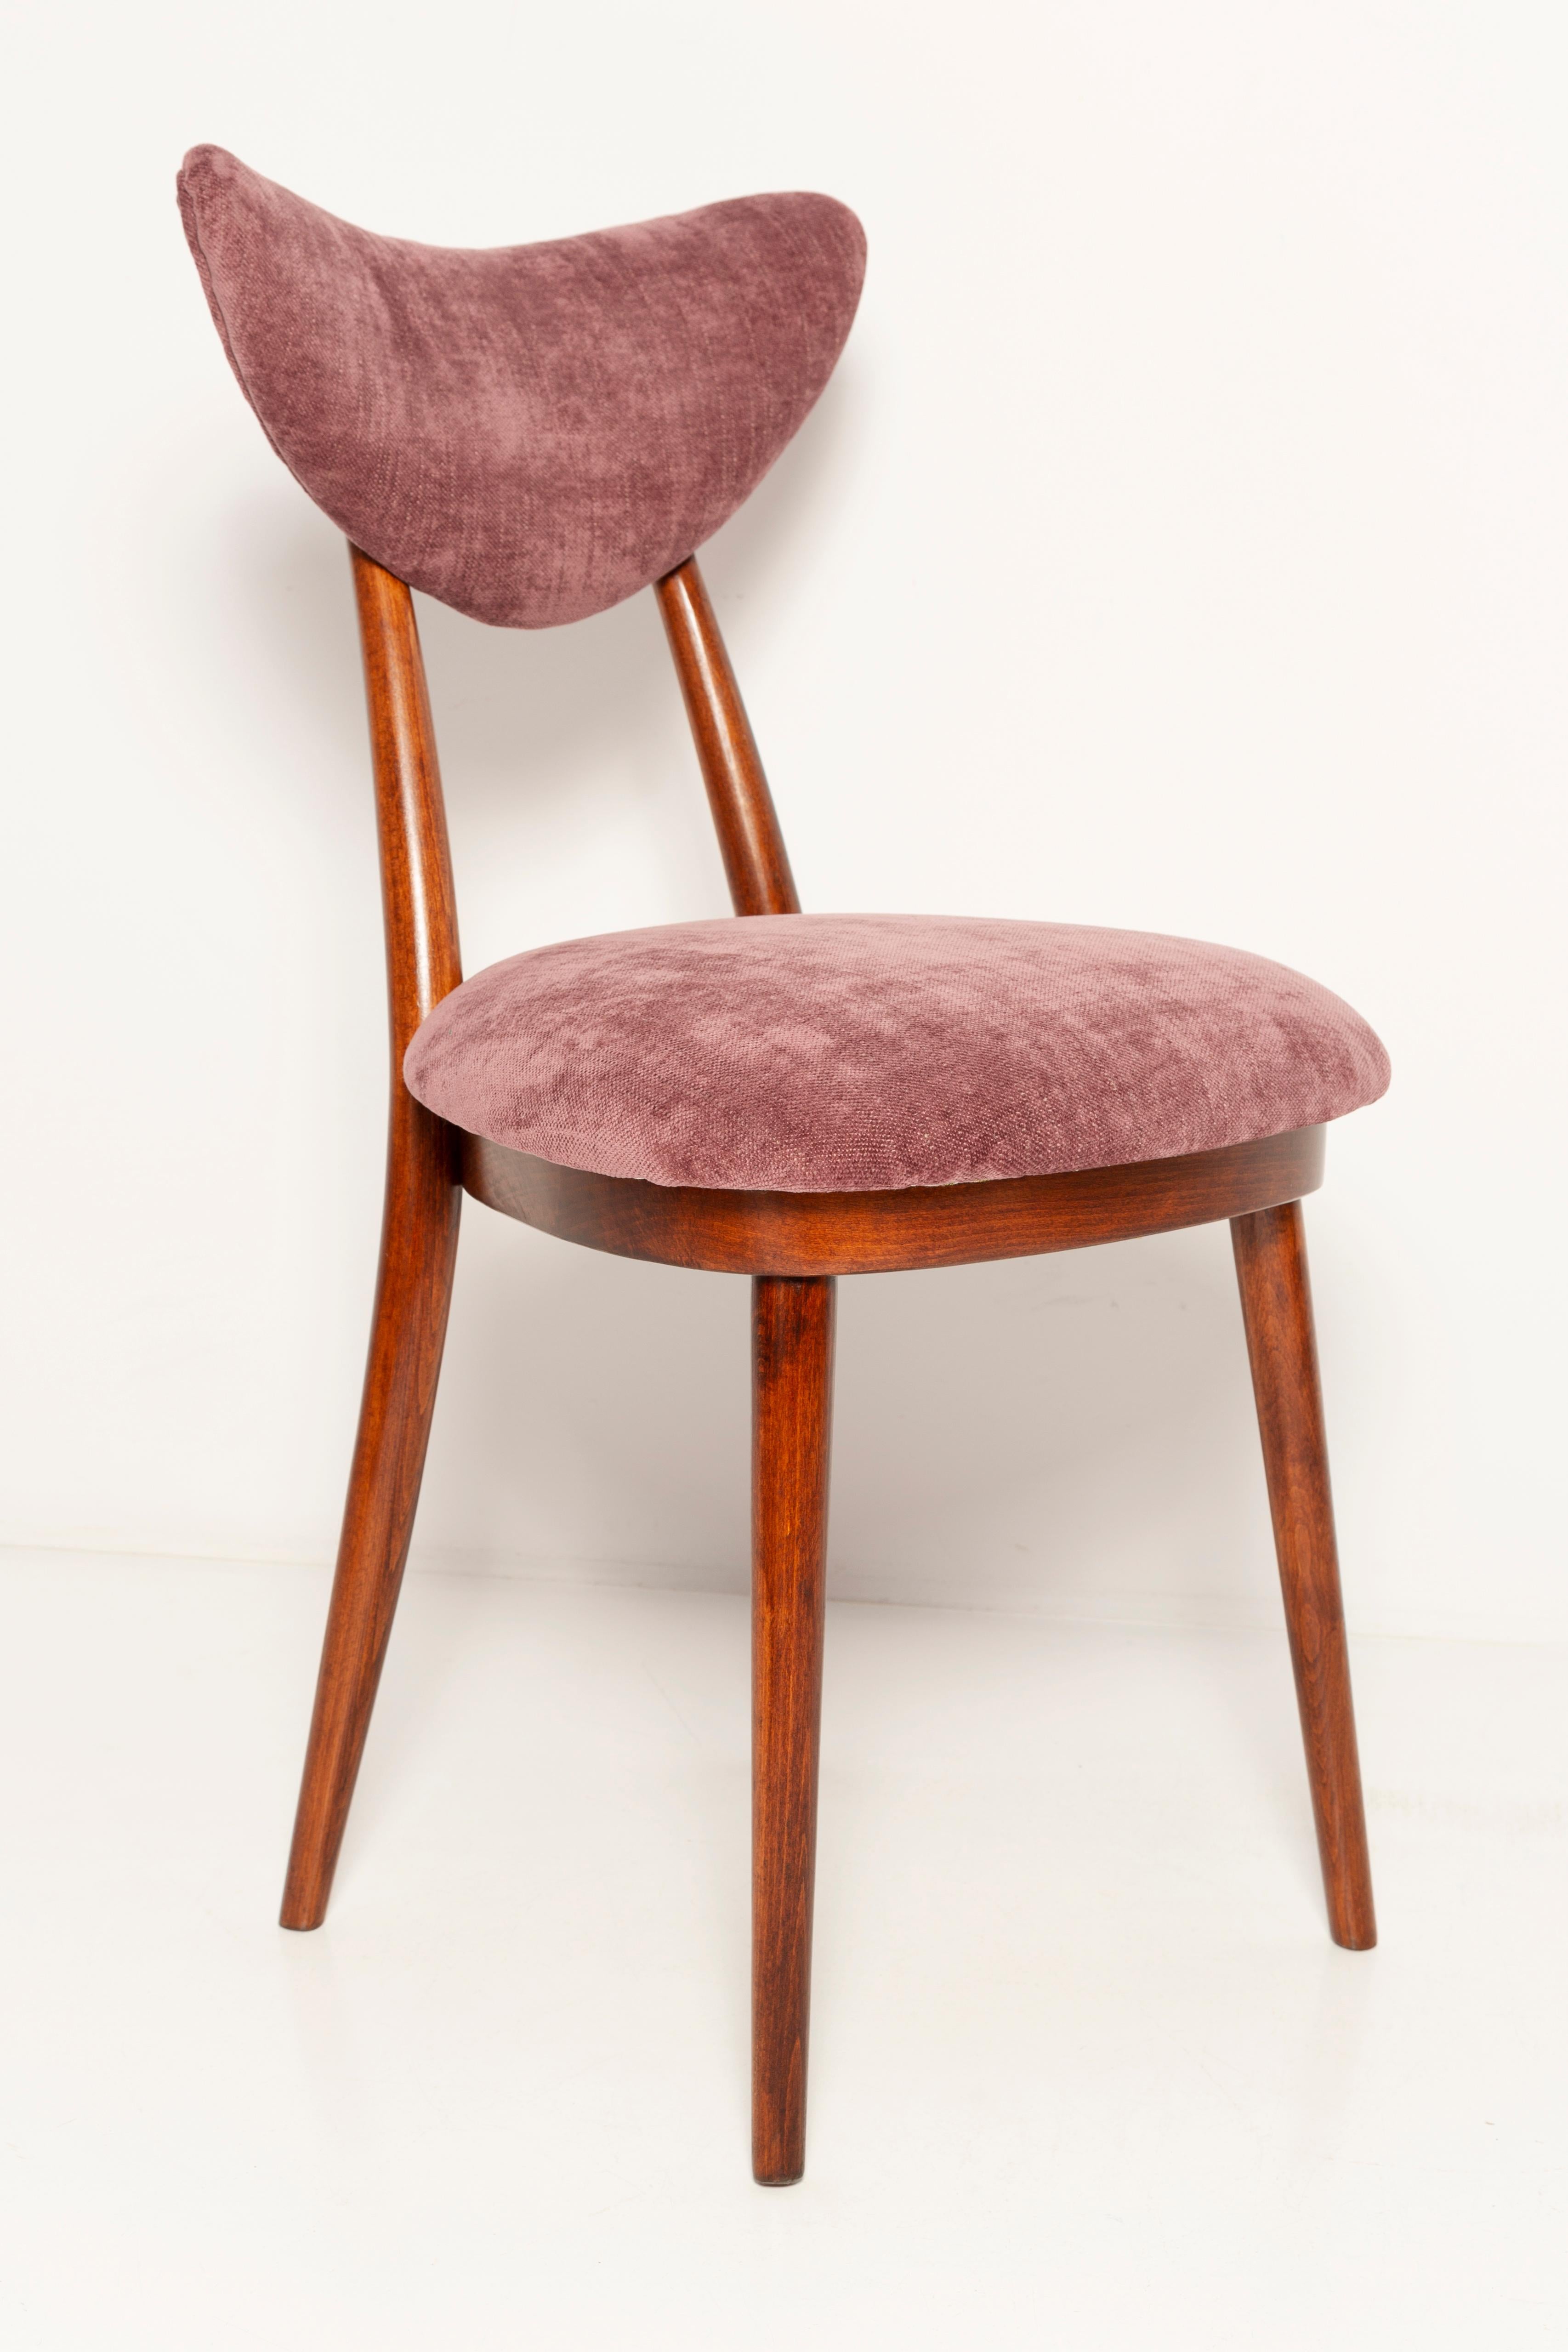 20th Century Set of Six Midcentury Burgundy Pink Velvet Heart Chairs, Europe, 1960s For Sale